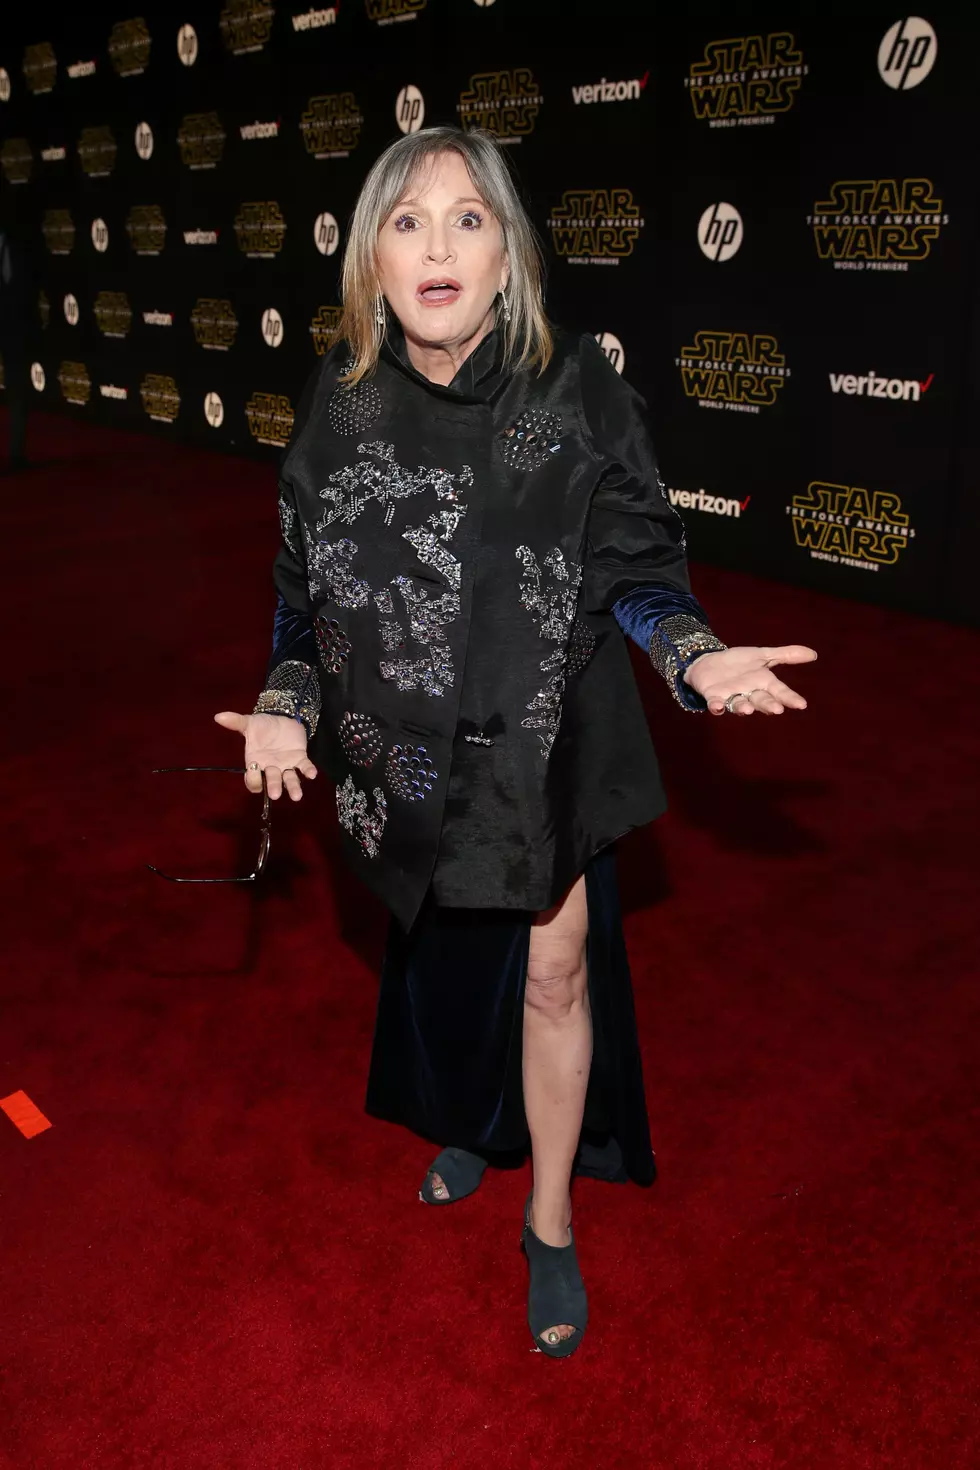 Carrie Fisher Suffers Massive Heart Attack!